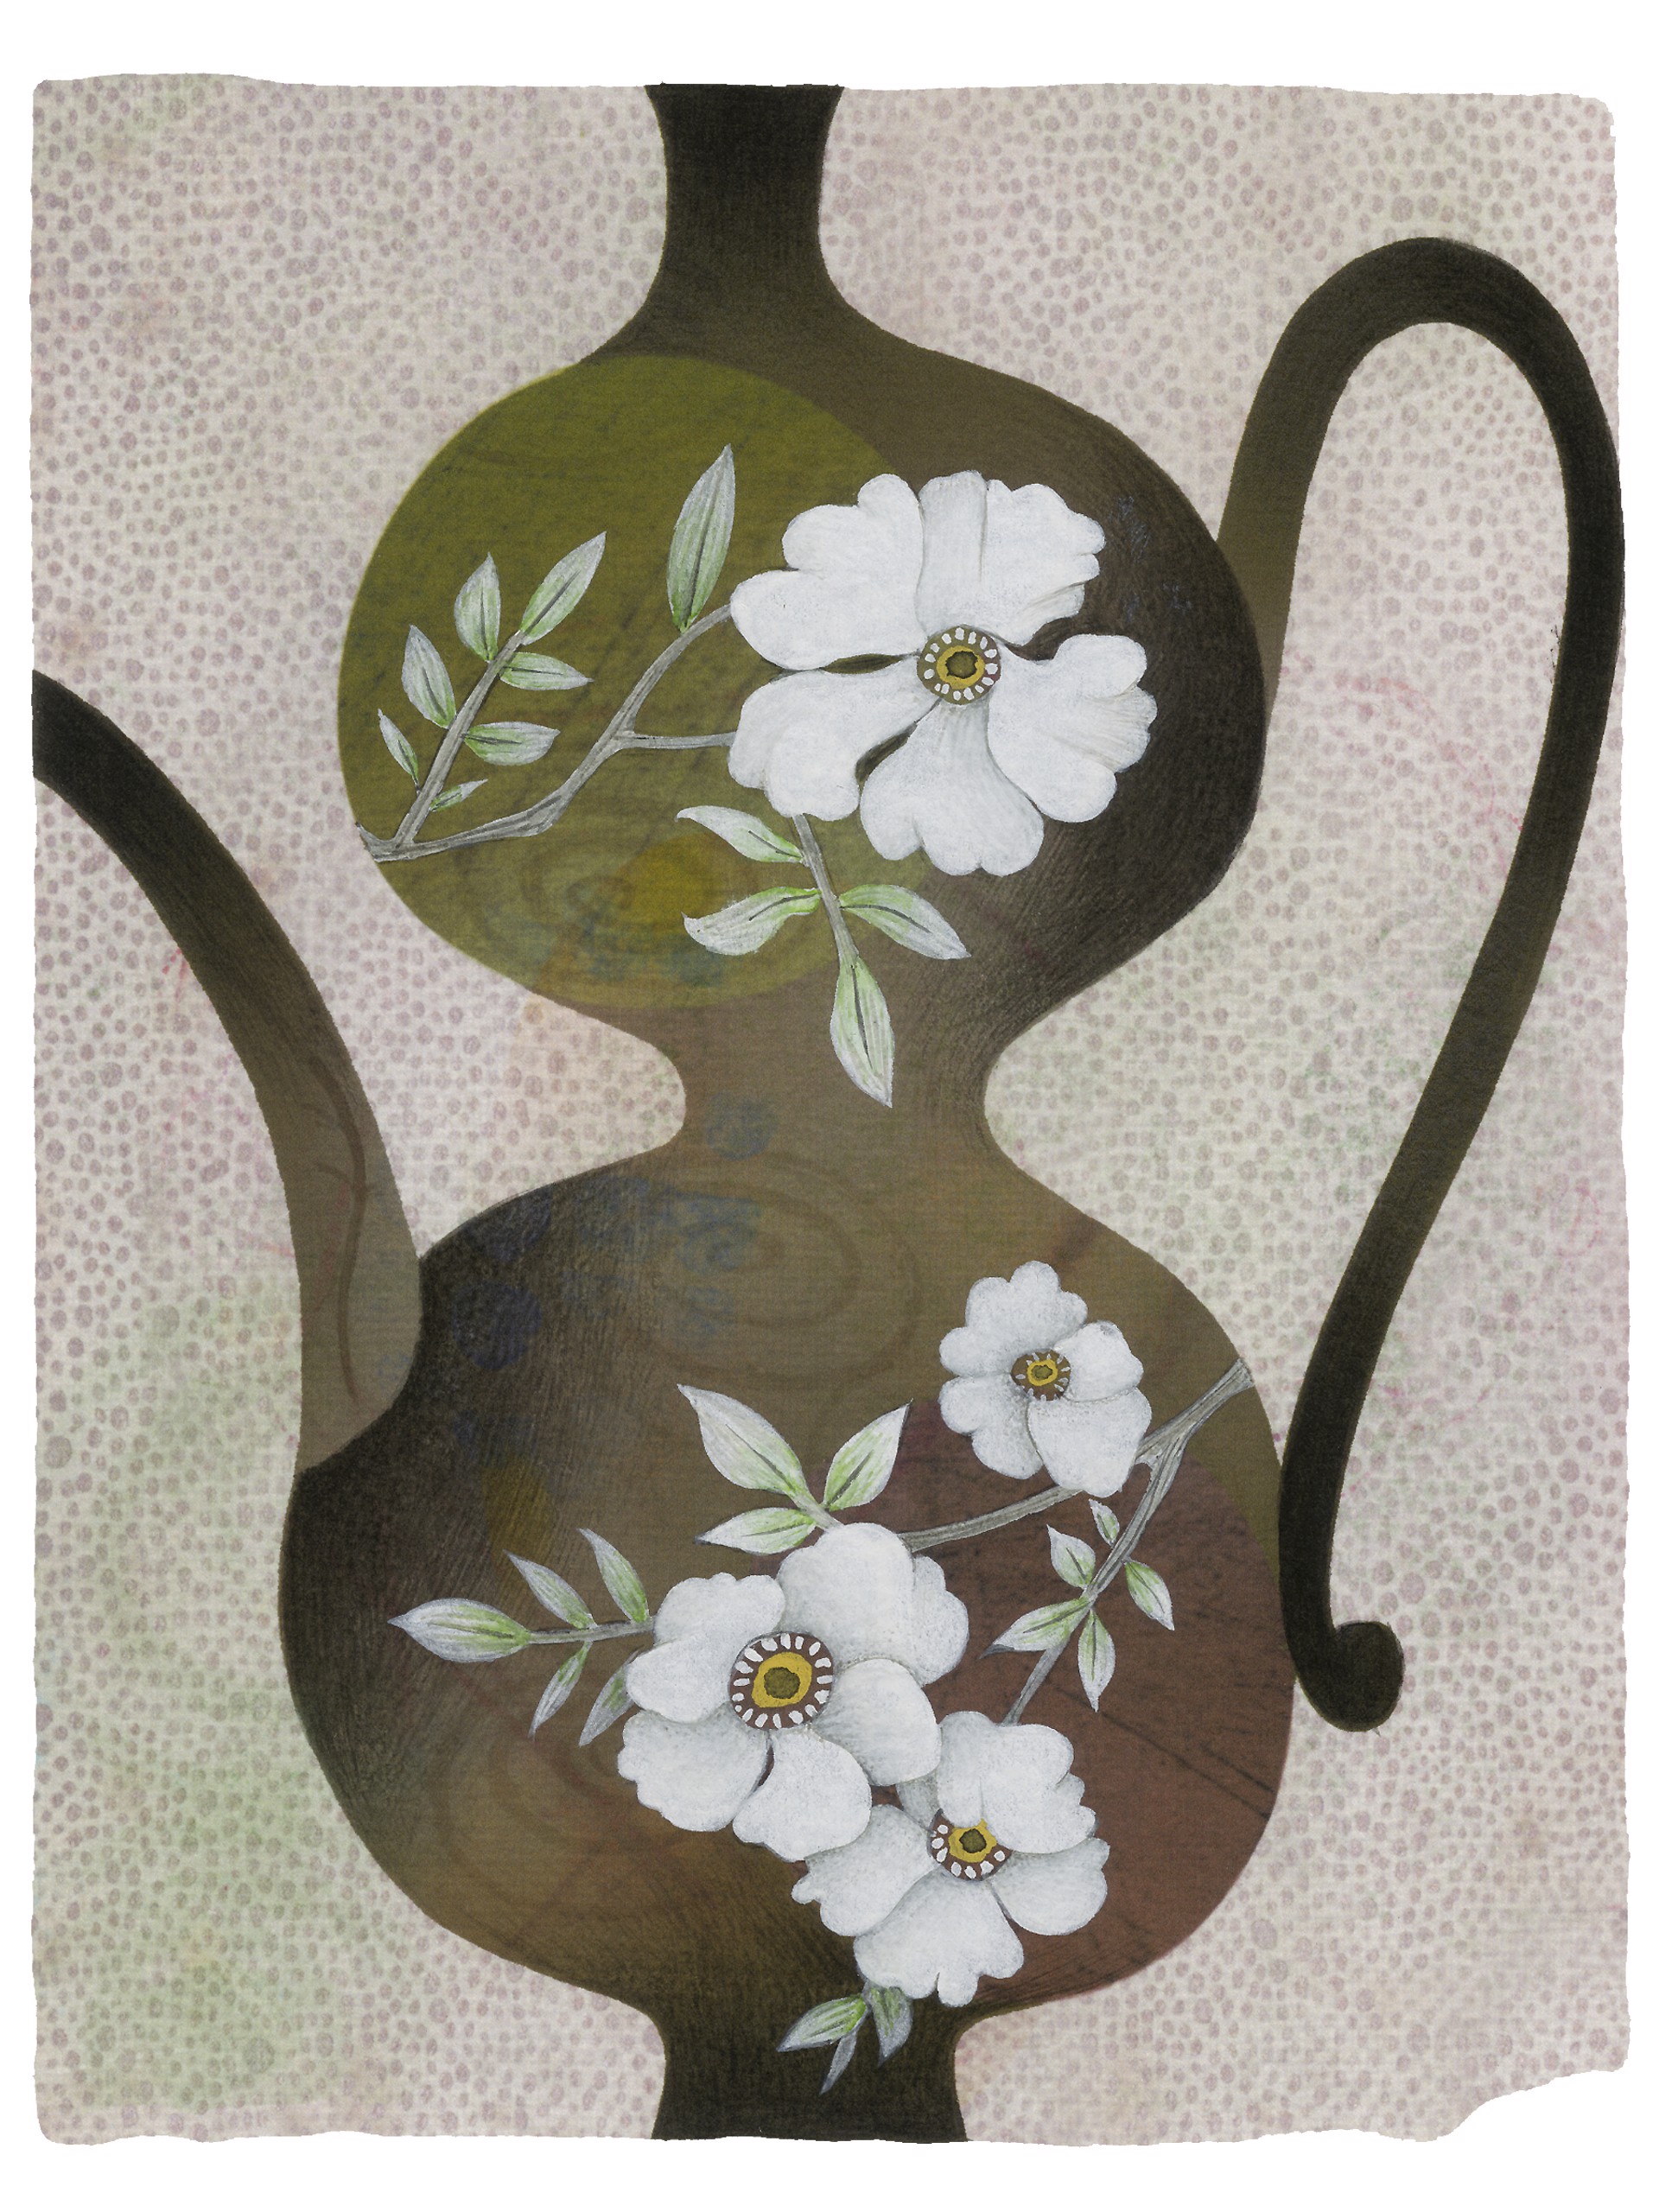 Ewer with Blossoms by Anne Smith